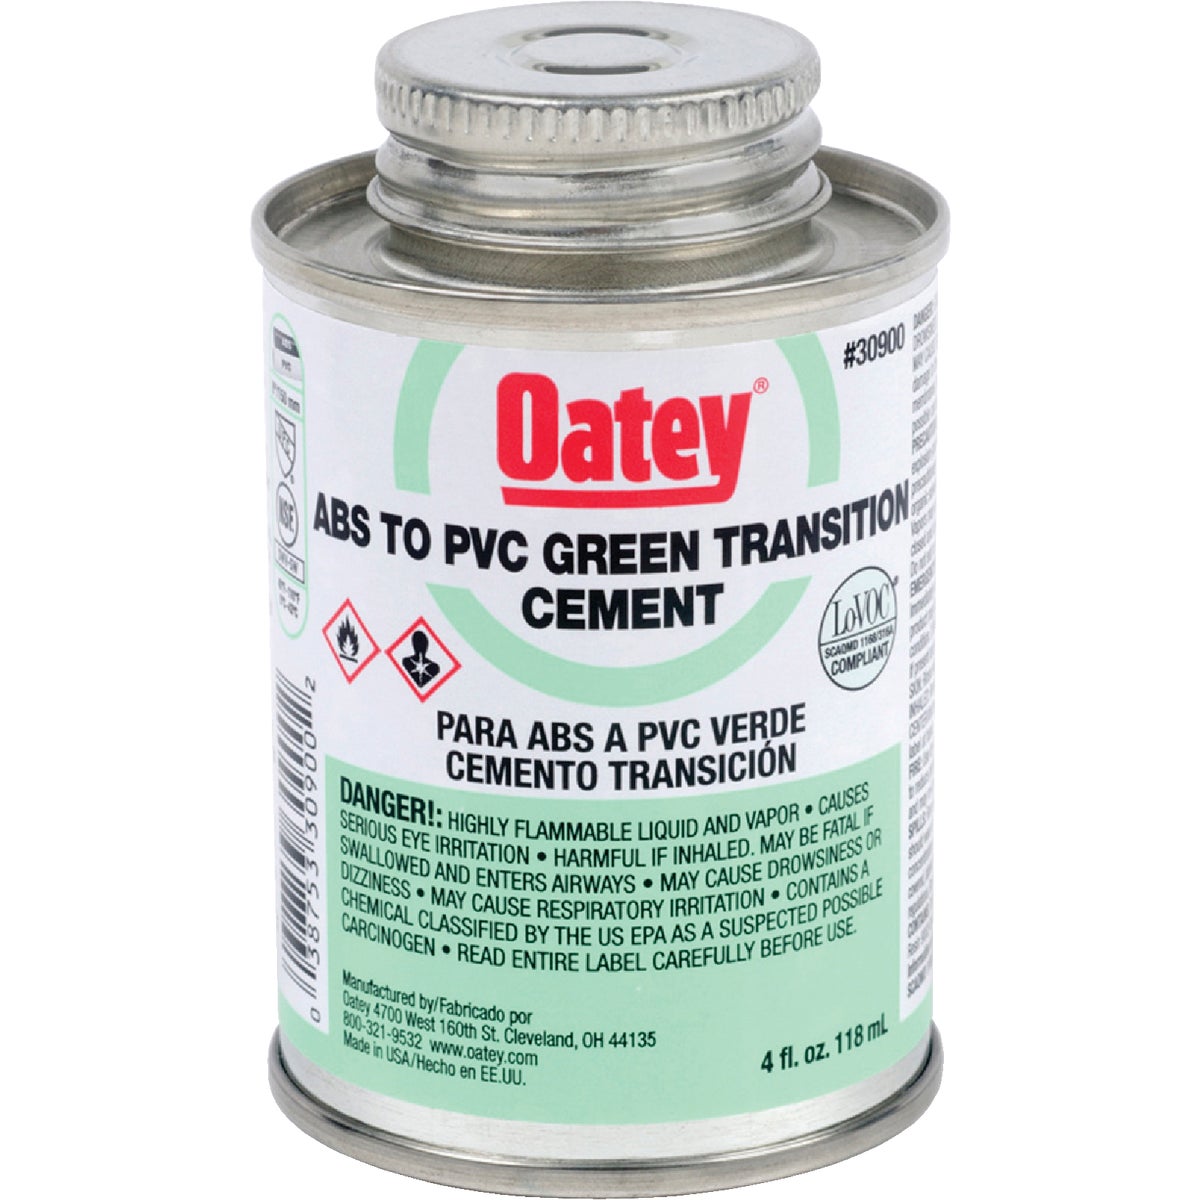 Oatey 4 Oz. Medium Bodied ABS to PVC Green Transition PVC Cement